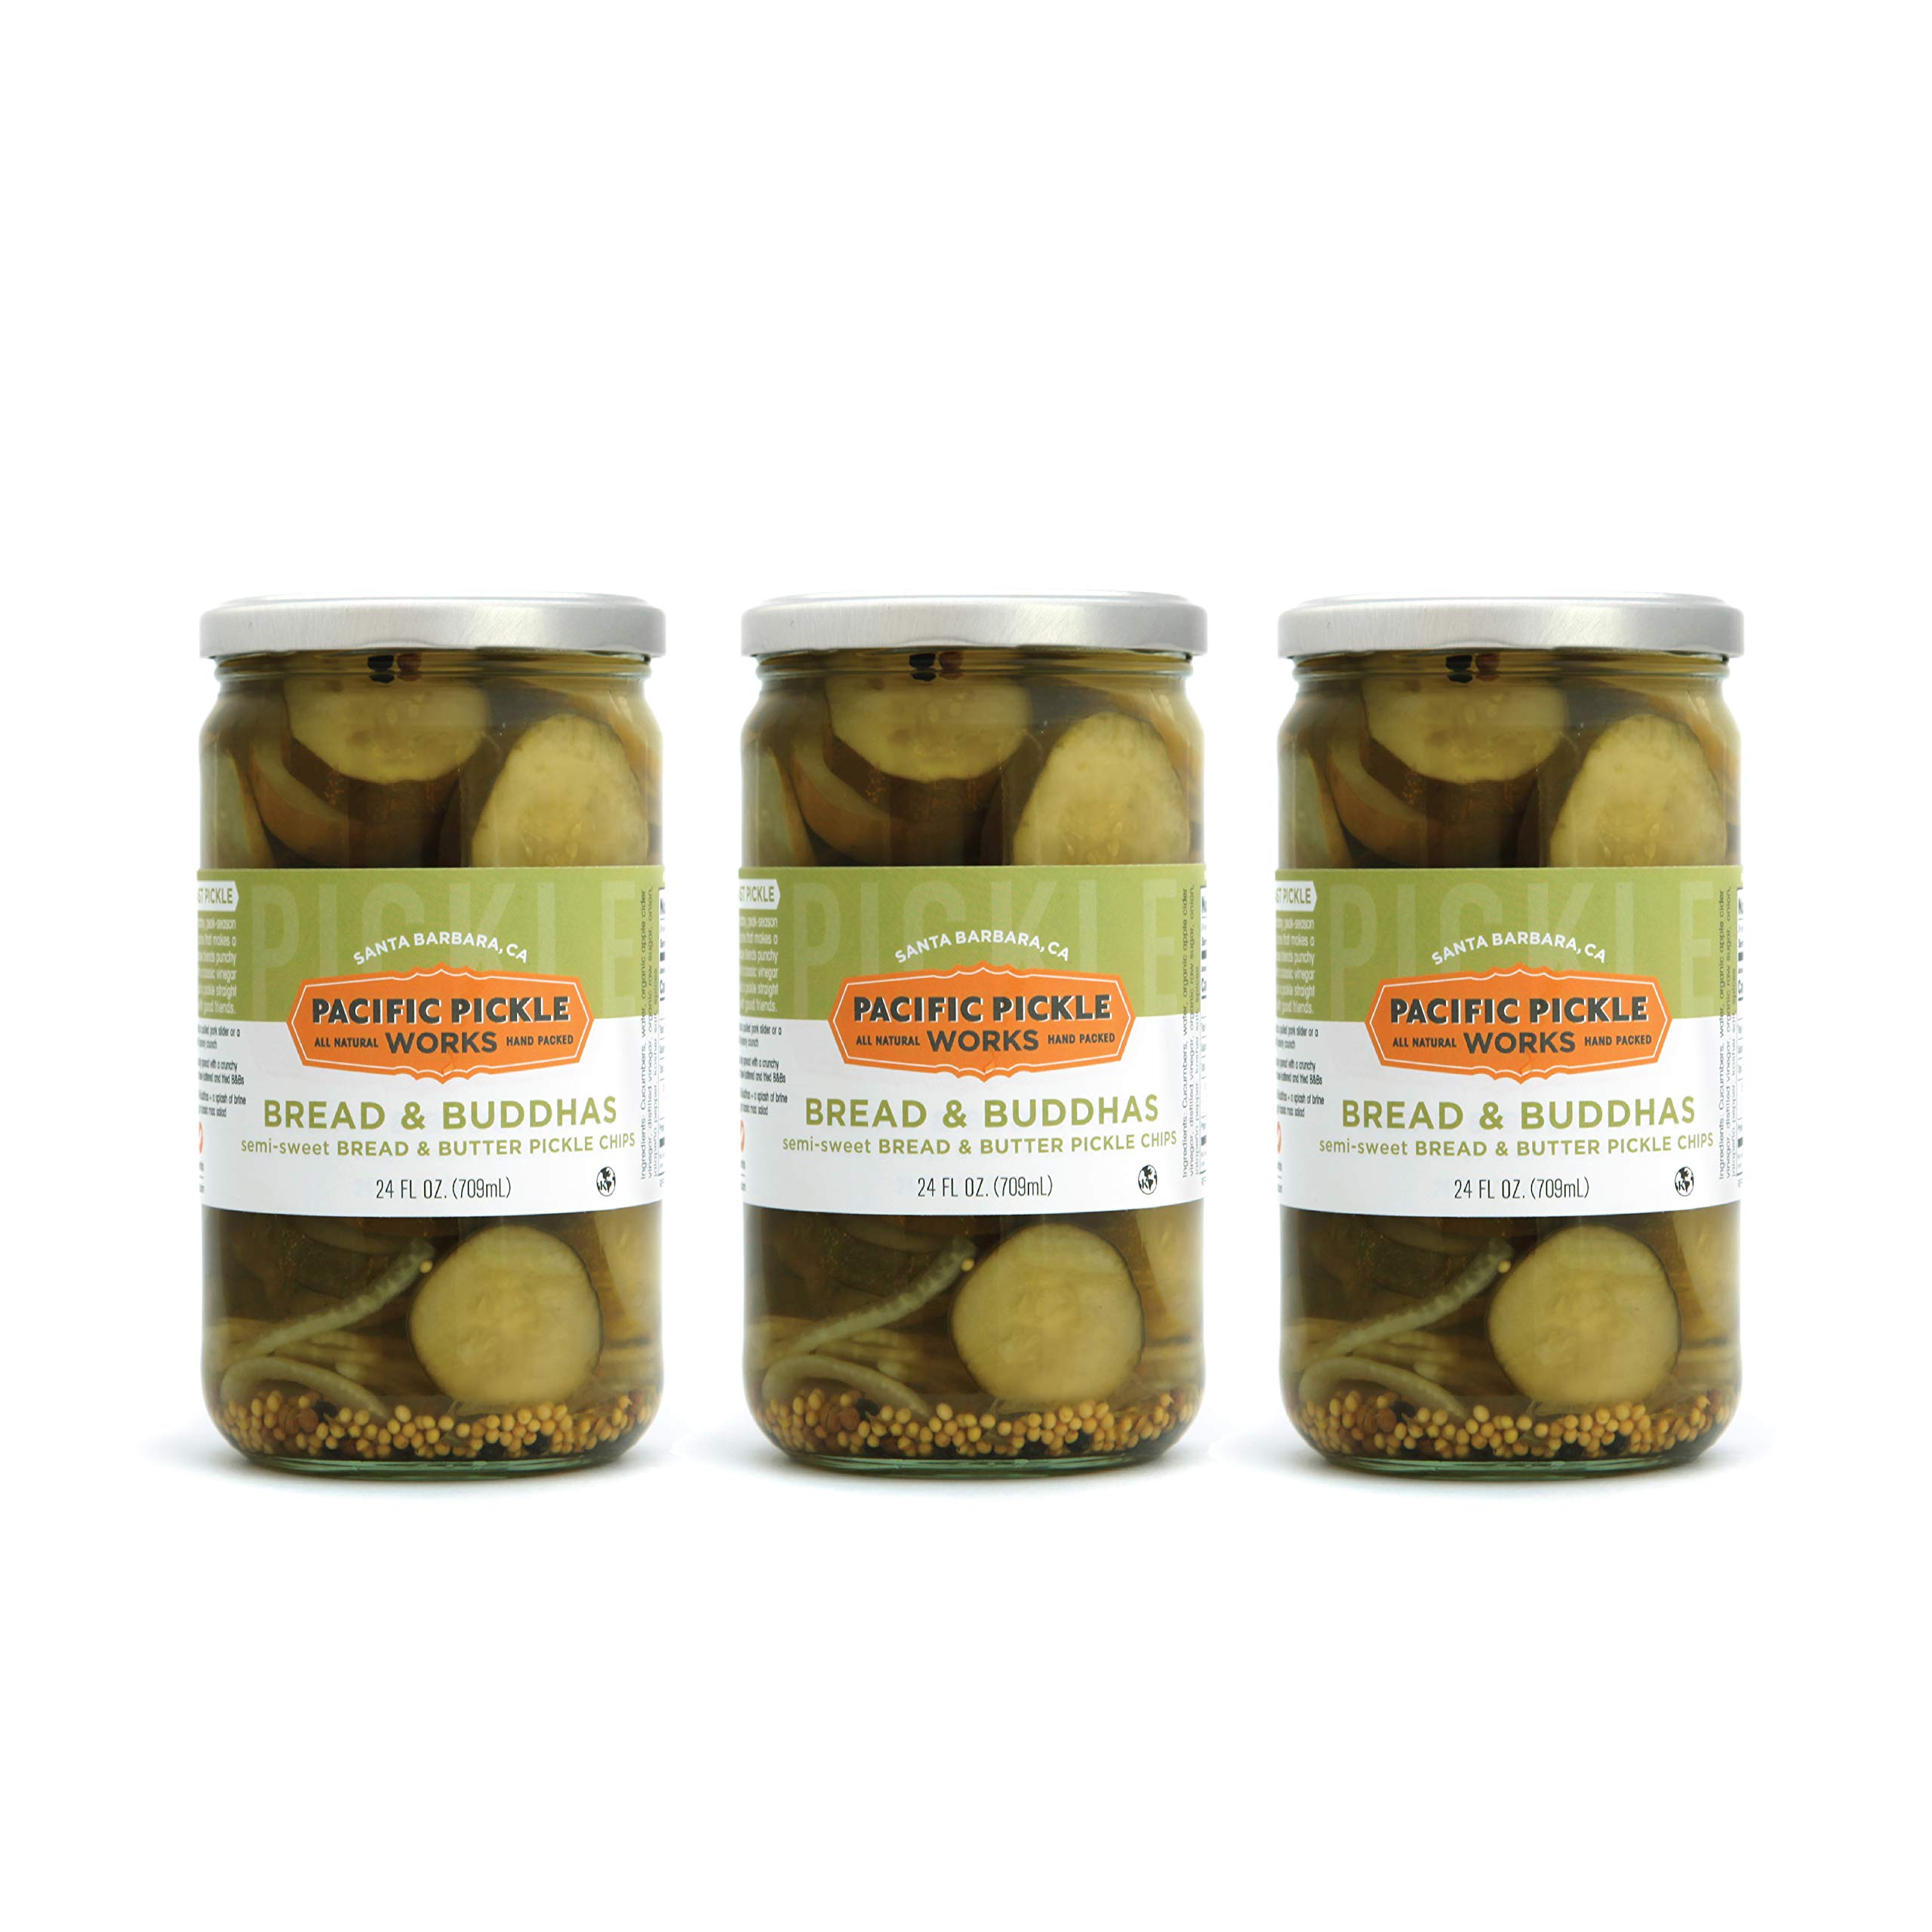 Bread and Buddhas - Bread and Butter Thick-Cut Pickle Chips - Gourmet Semi-Sweet Sandwich Pickles for Snacking - non-GMO, Kosher, Gluten-Free 24oz ...